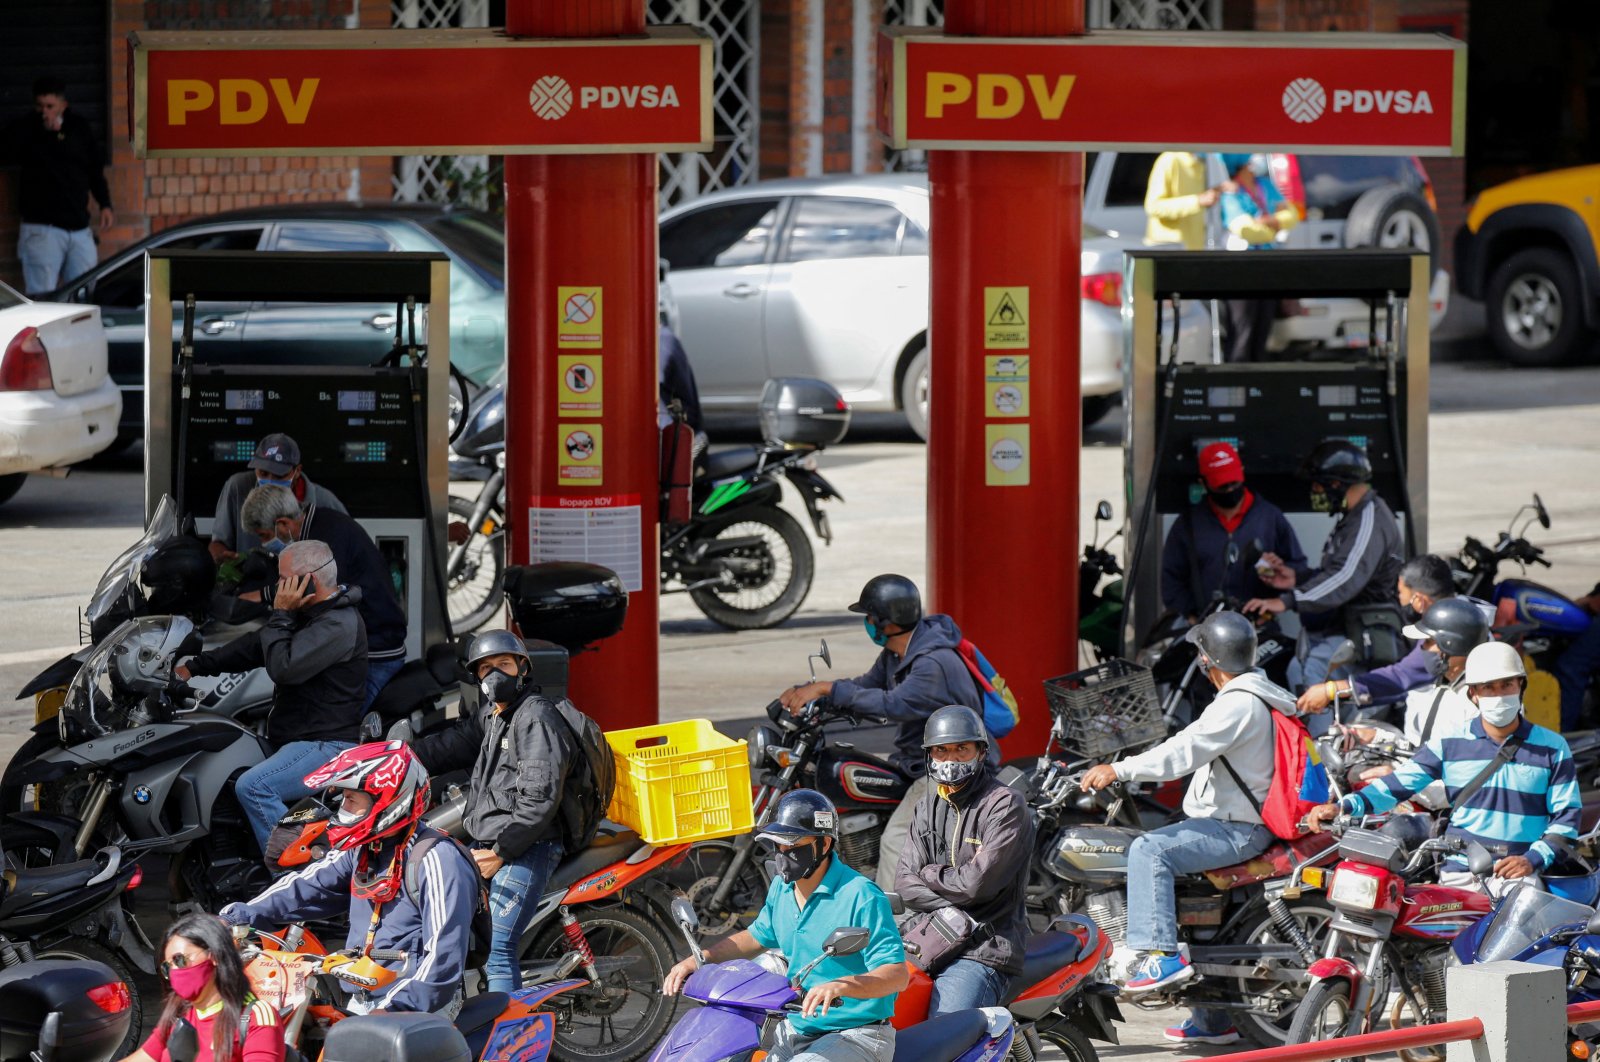 People on motorcycles refill gasoline at a gas station in San Antonio, near Caracas, Venezuela, Sept. 9, 2020. (Reuters Photo)